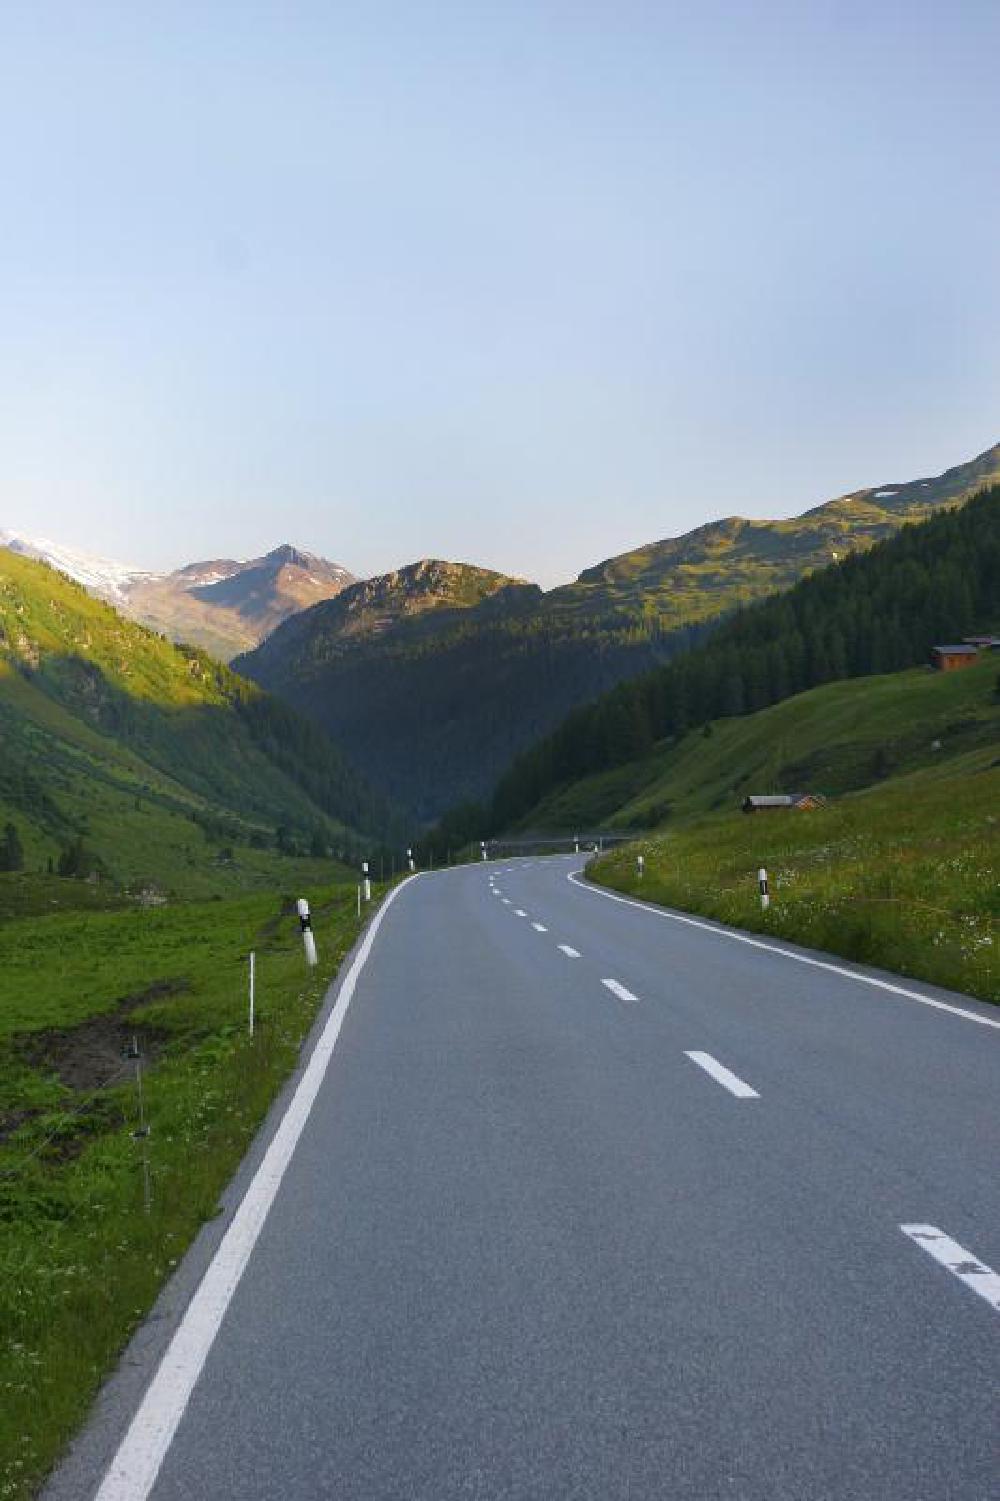 The road across the Fluela Pass (Fuelapass) to Italy, as featured in Top Gear's Ultimate Driving Roads